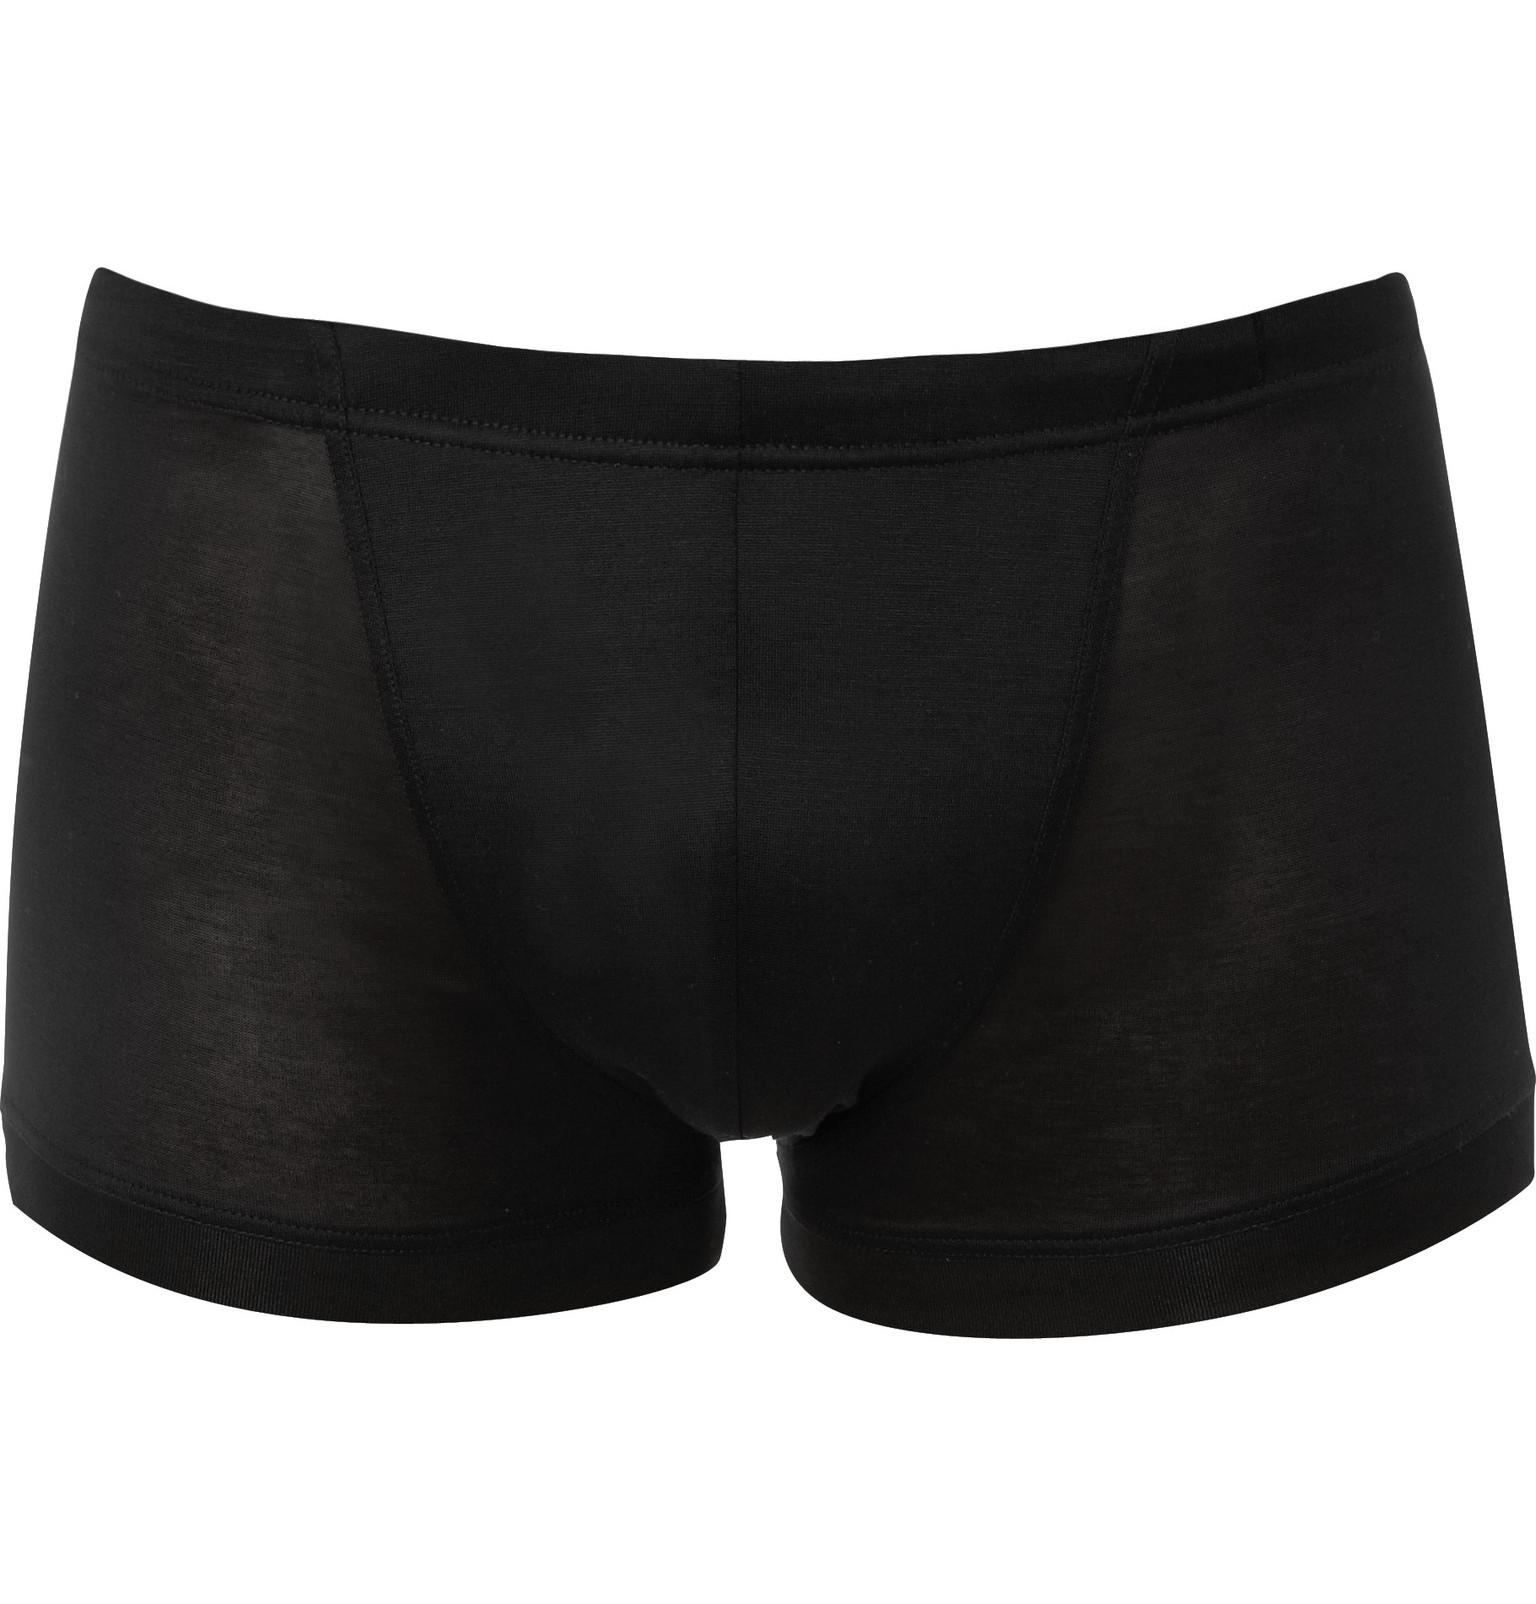 Lyst - Zimmerli Royal Classic Cotton Boxer Briefs in Black for Men